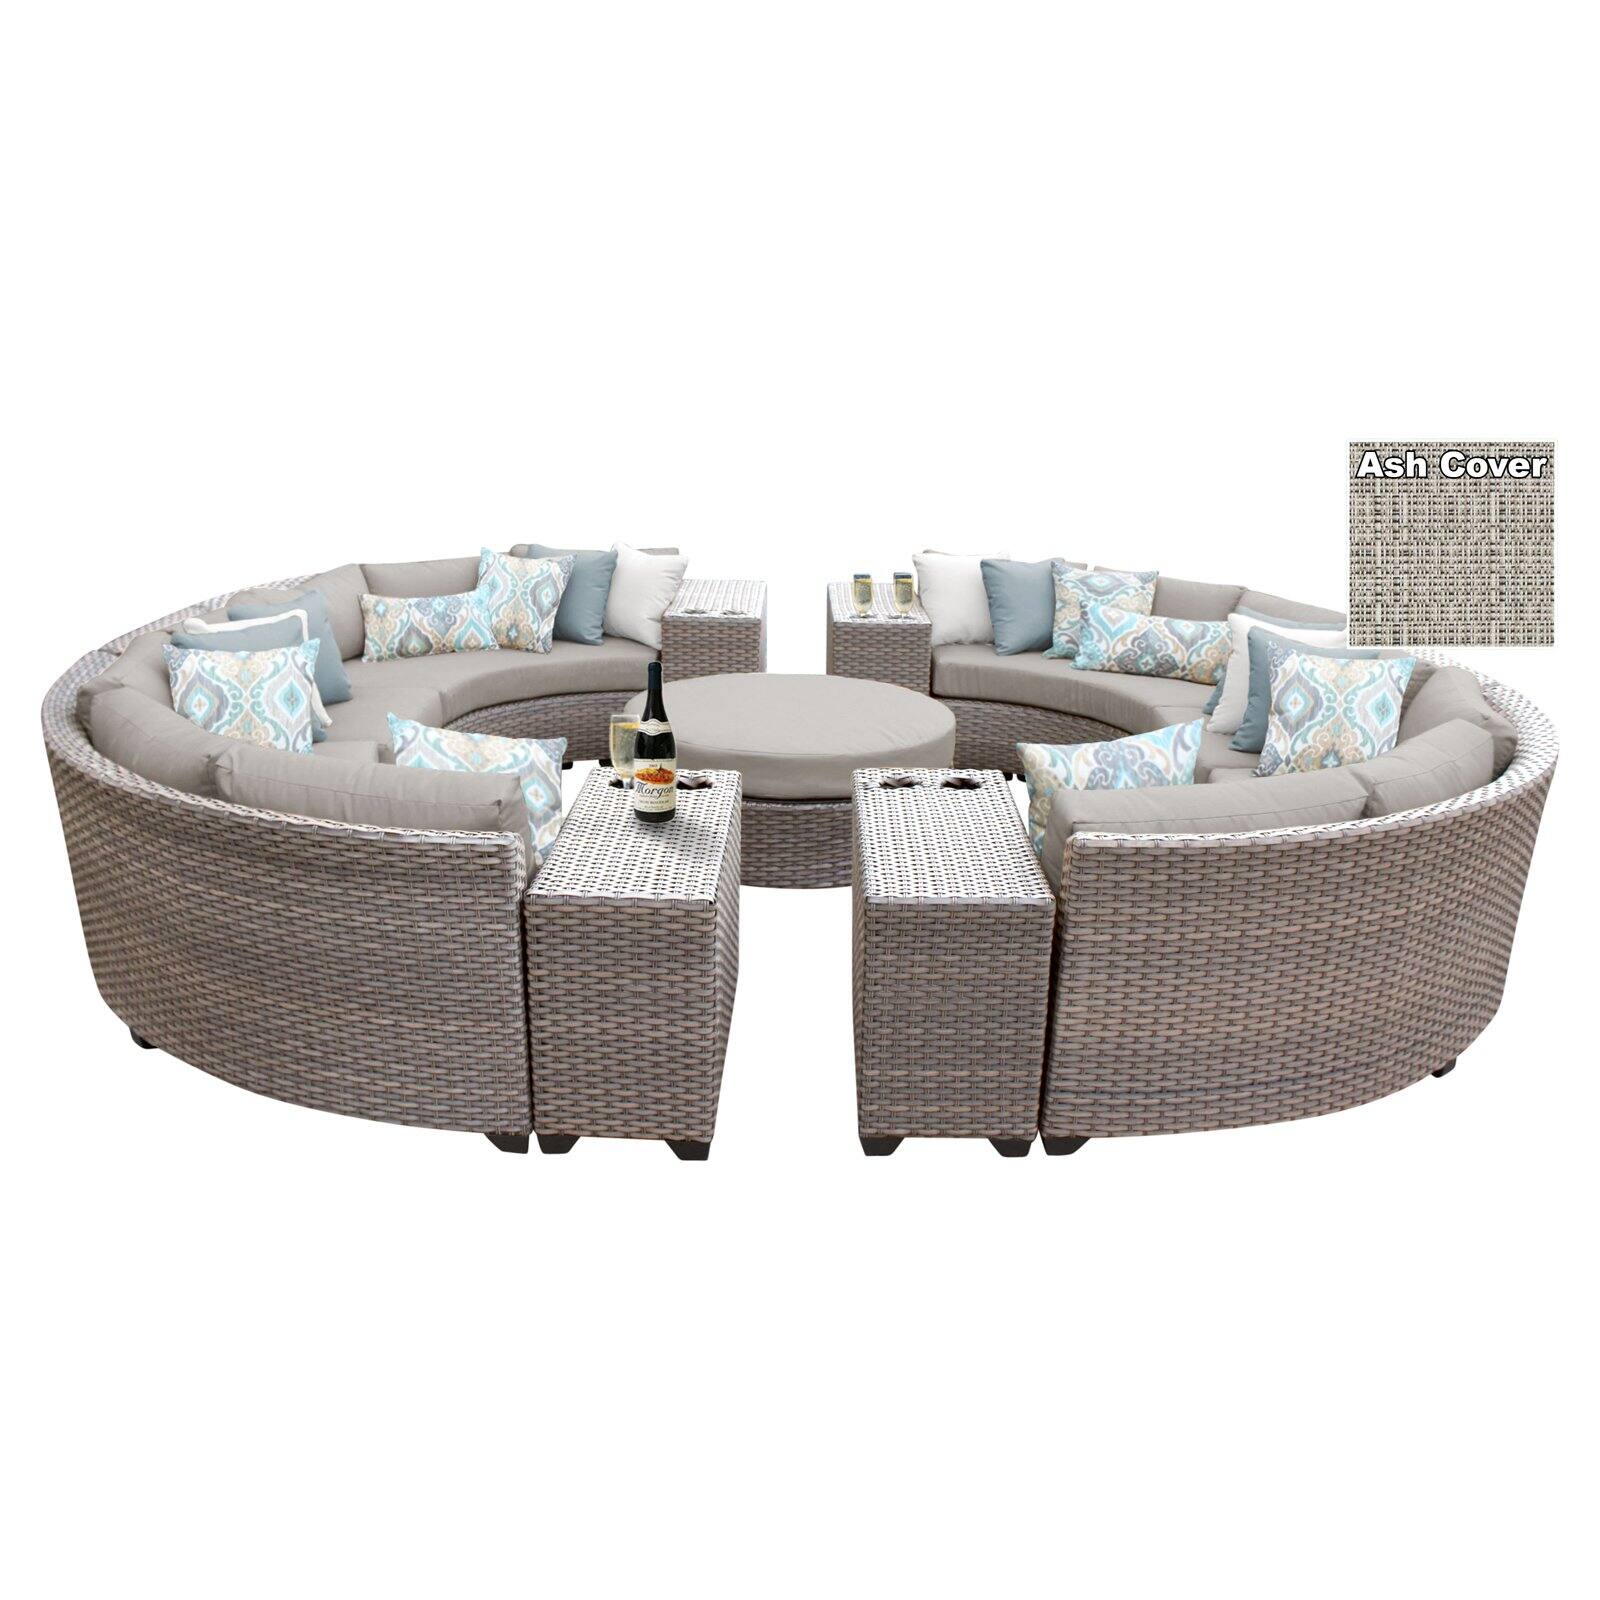 TK Classics Florence Wicker 11 Piece Patio Conversation Set with Coffee Table and 2 Sets of Cushion Covers - image 1 of 2